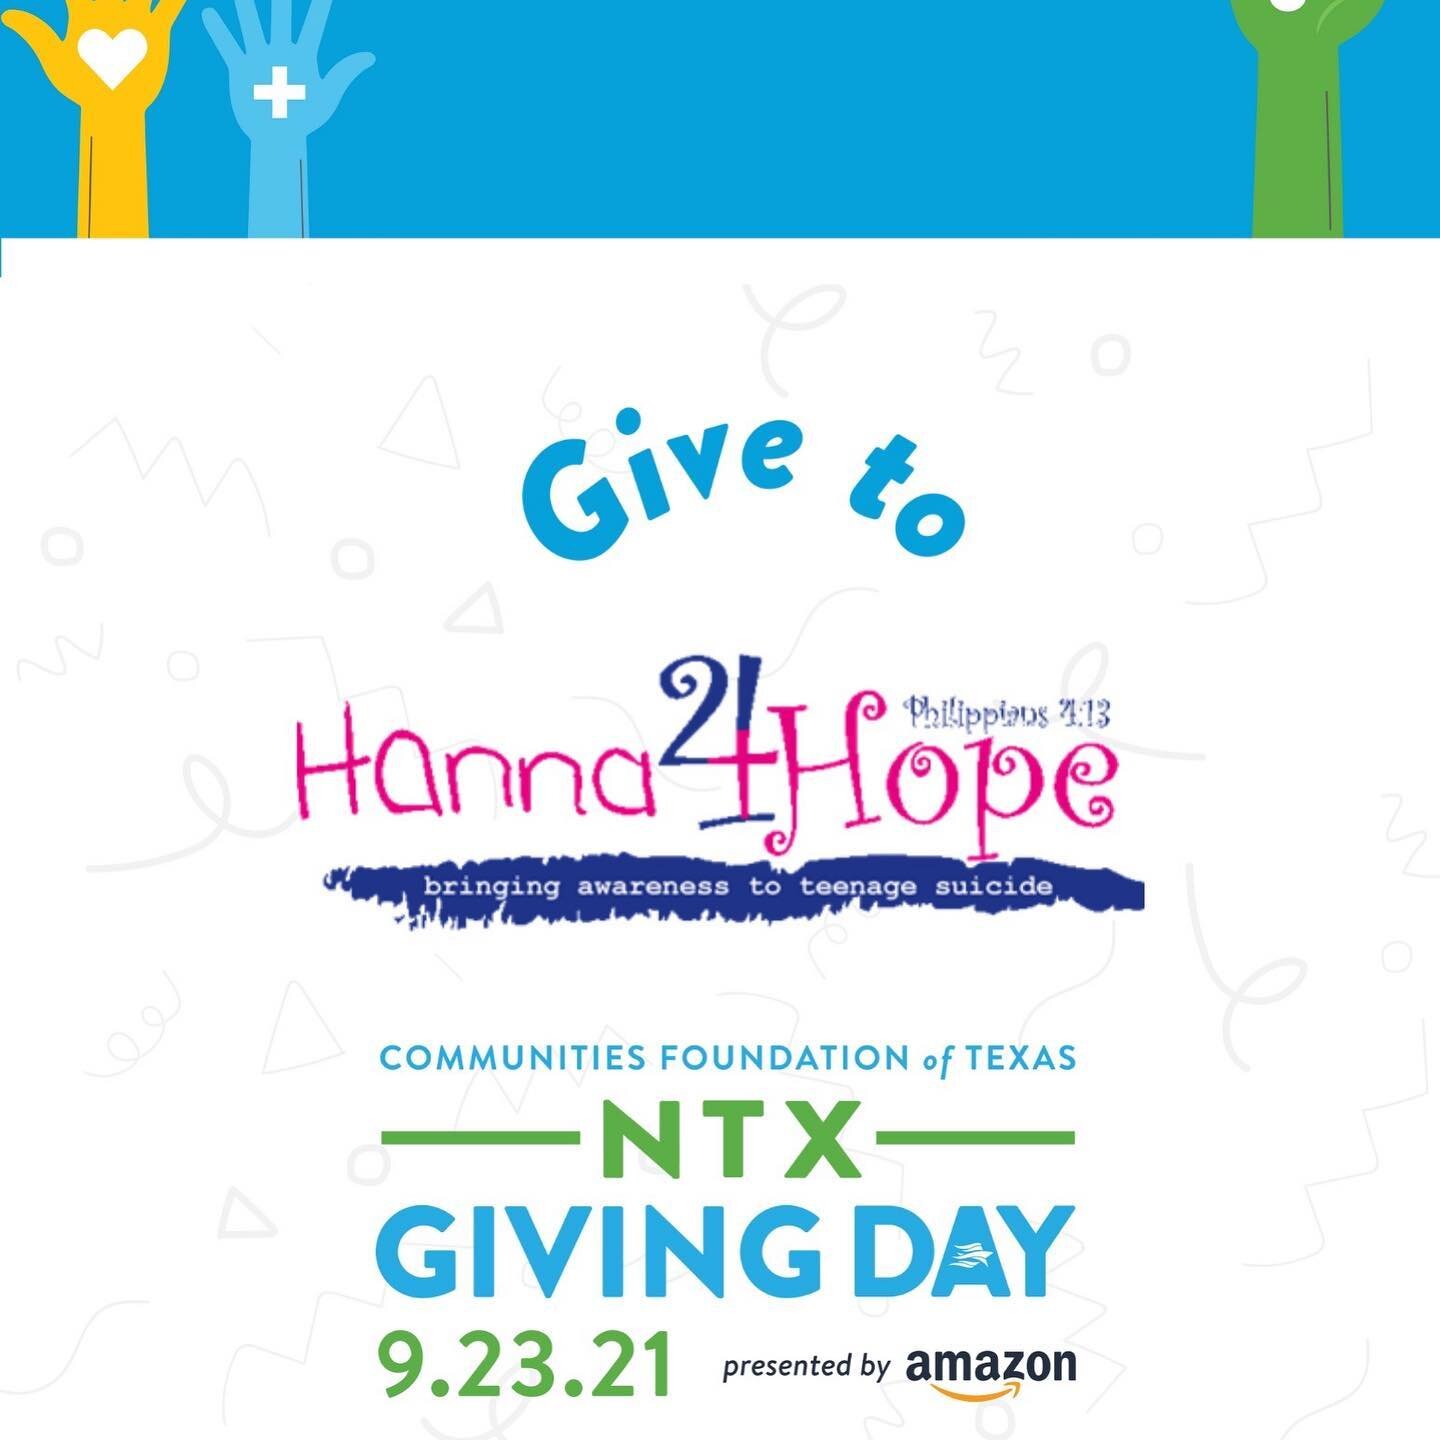 TODAY IS THE DAY! 

All across North Texas, people are donating to non-profits of their choice today, on North Texas Giving Day. #NTxGivingDay

We ask that you consider donating to Hanna4Hope as part of your North Texas Giving Day donation. 

Suicide